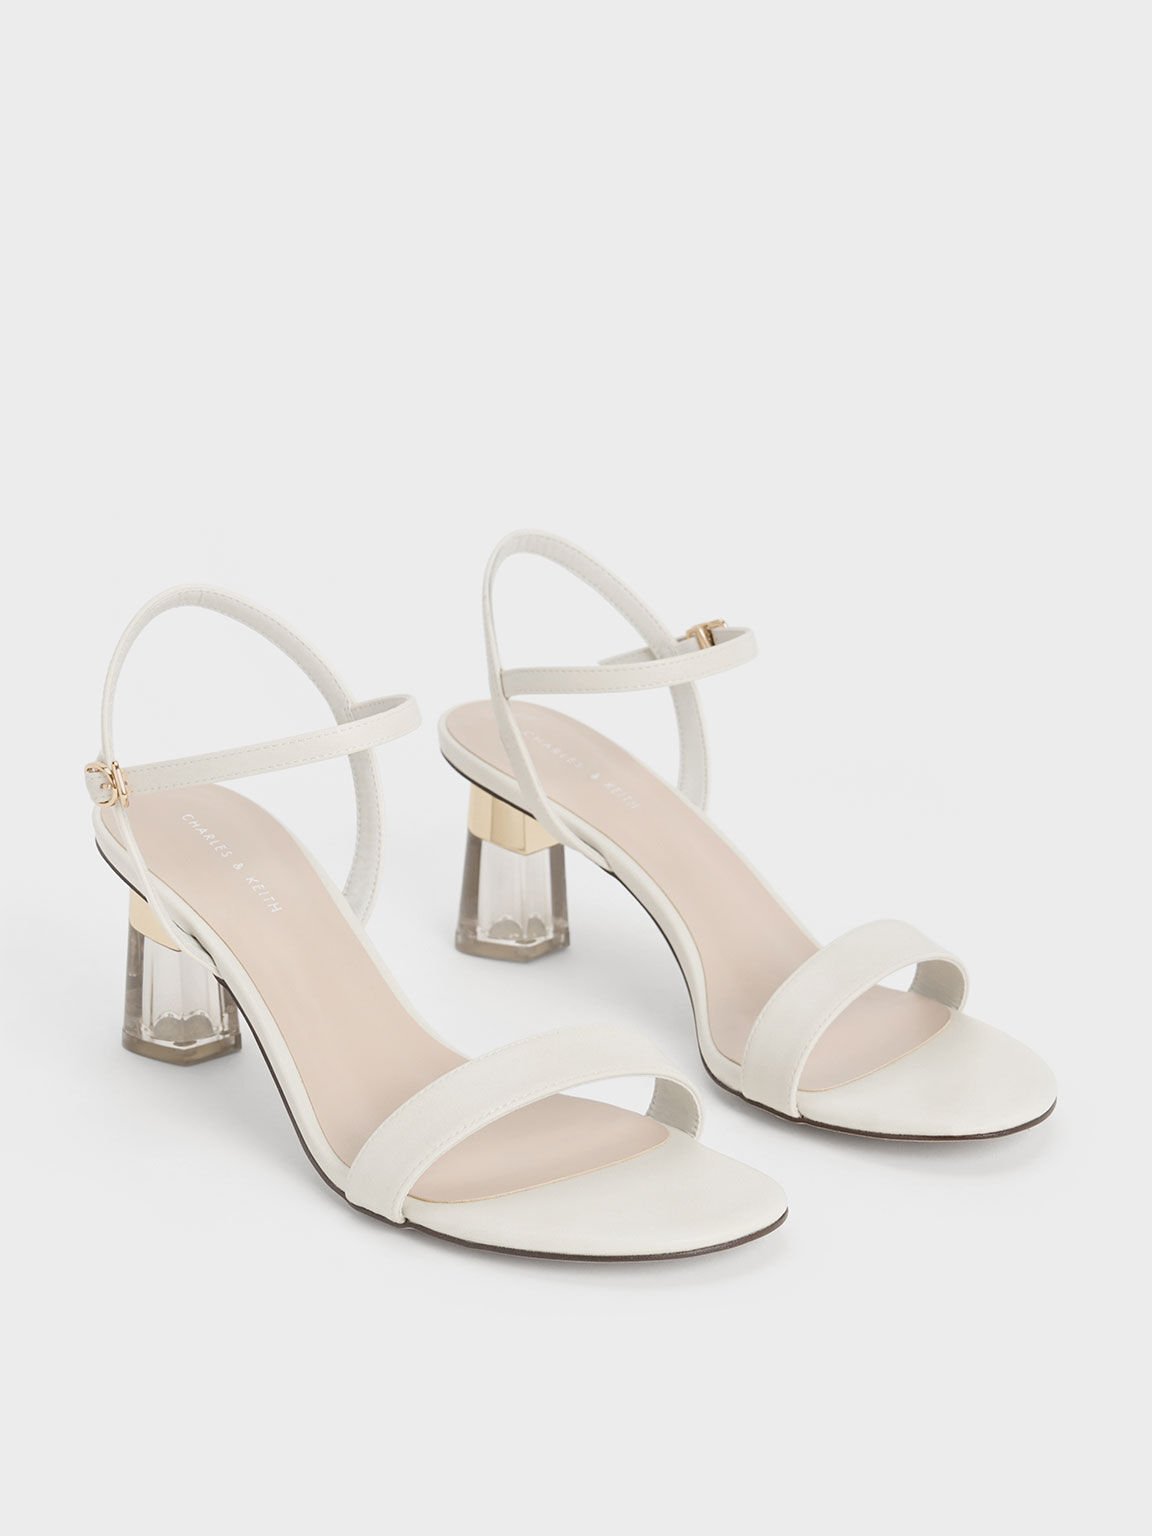 Chalk Clear Trapeze Heel Sandals - CHARLES & KEITH US